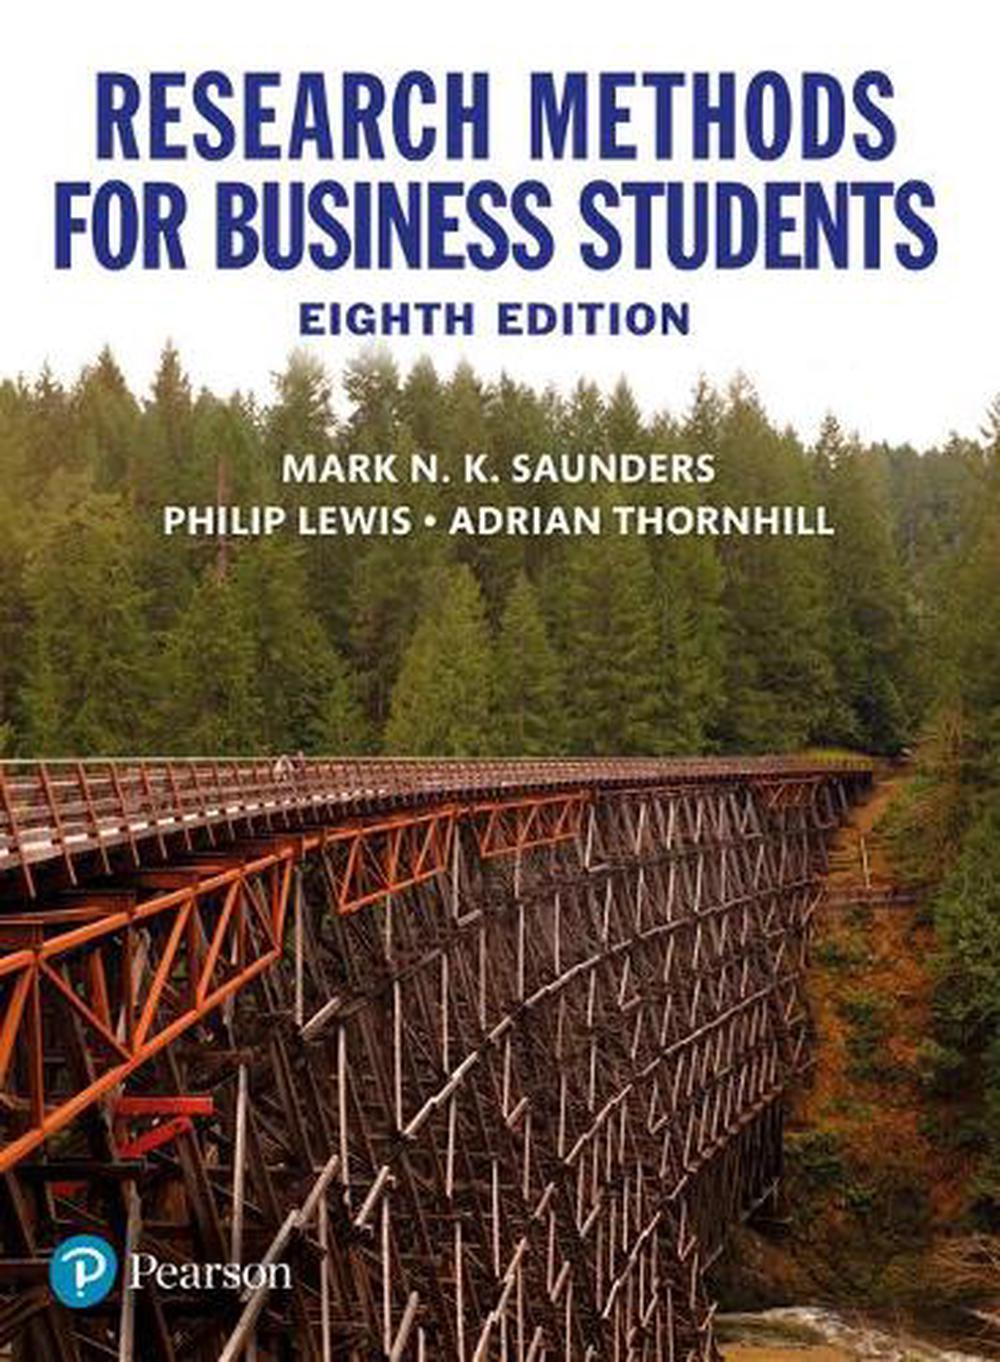 research methods for business students pdf